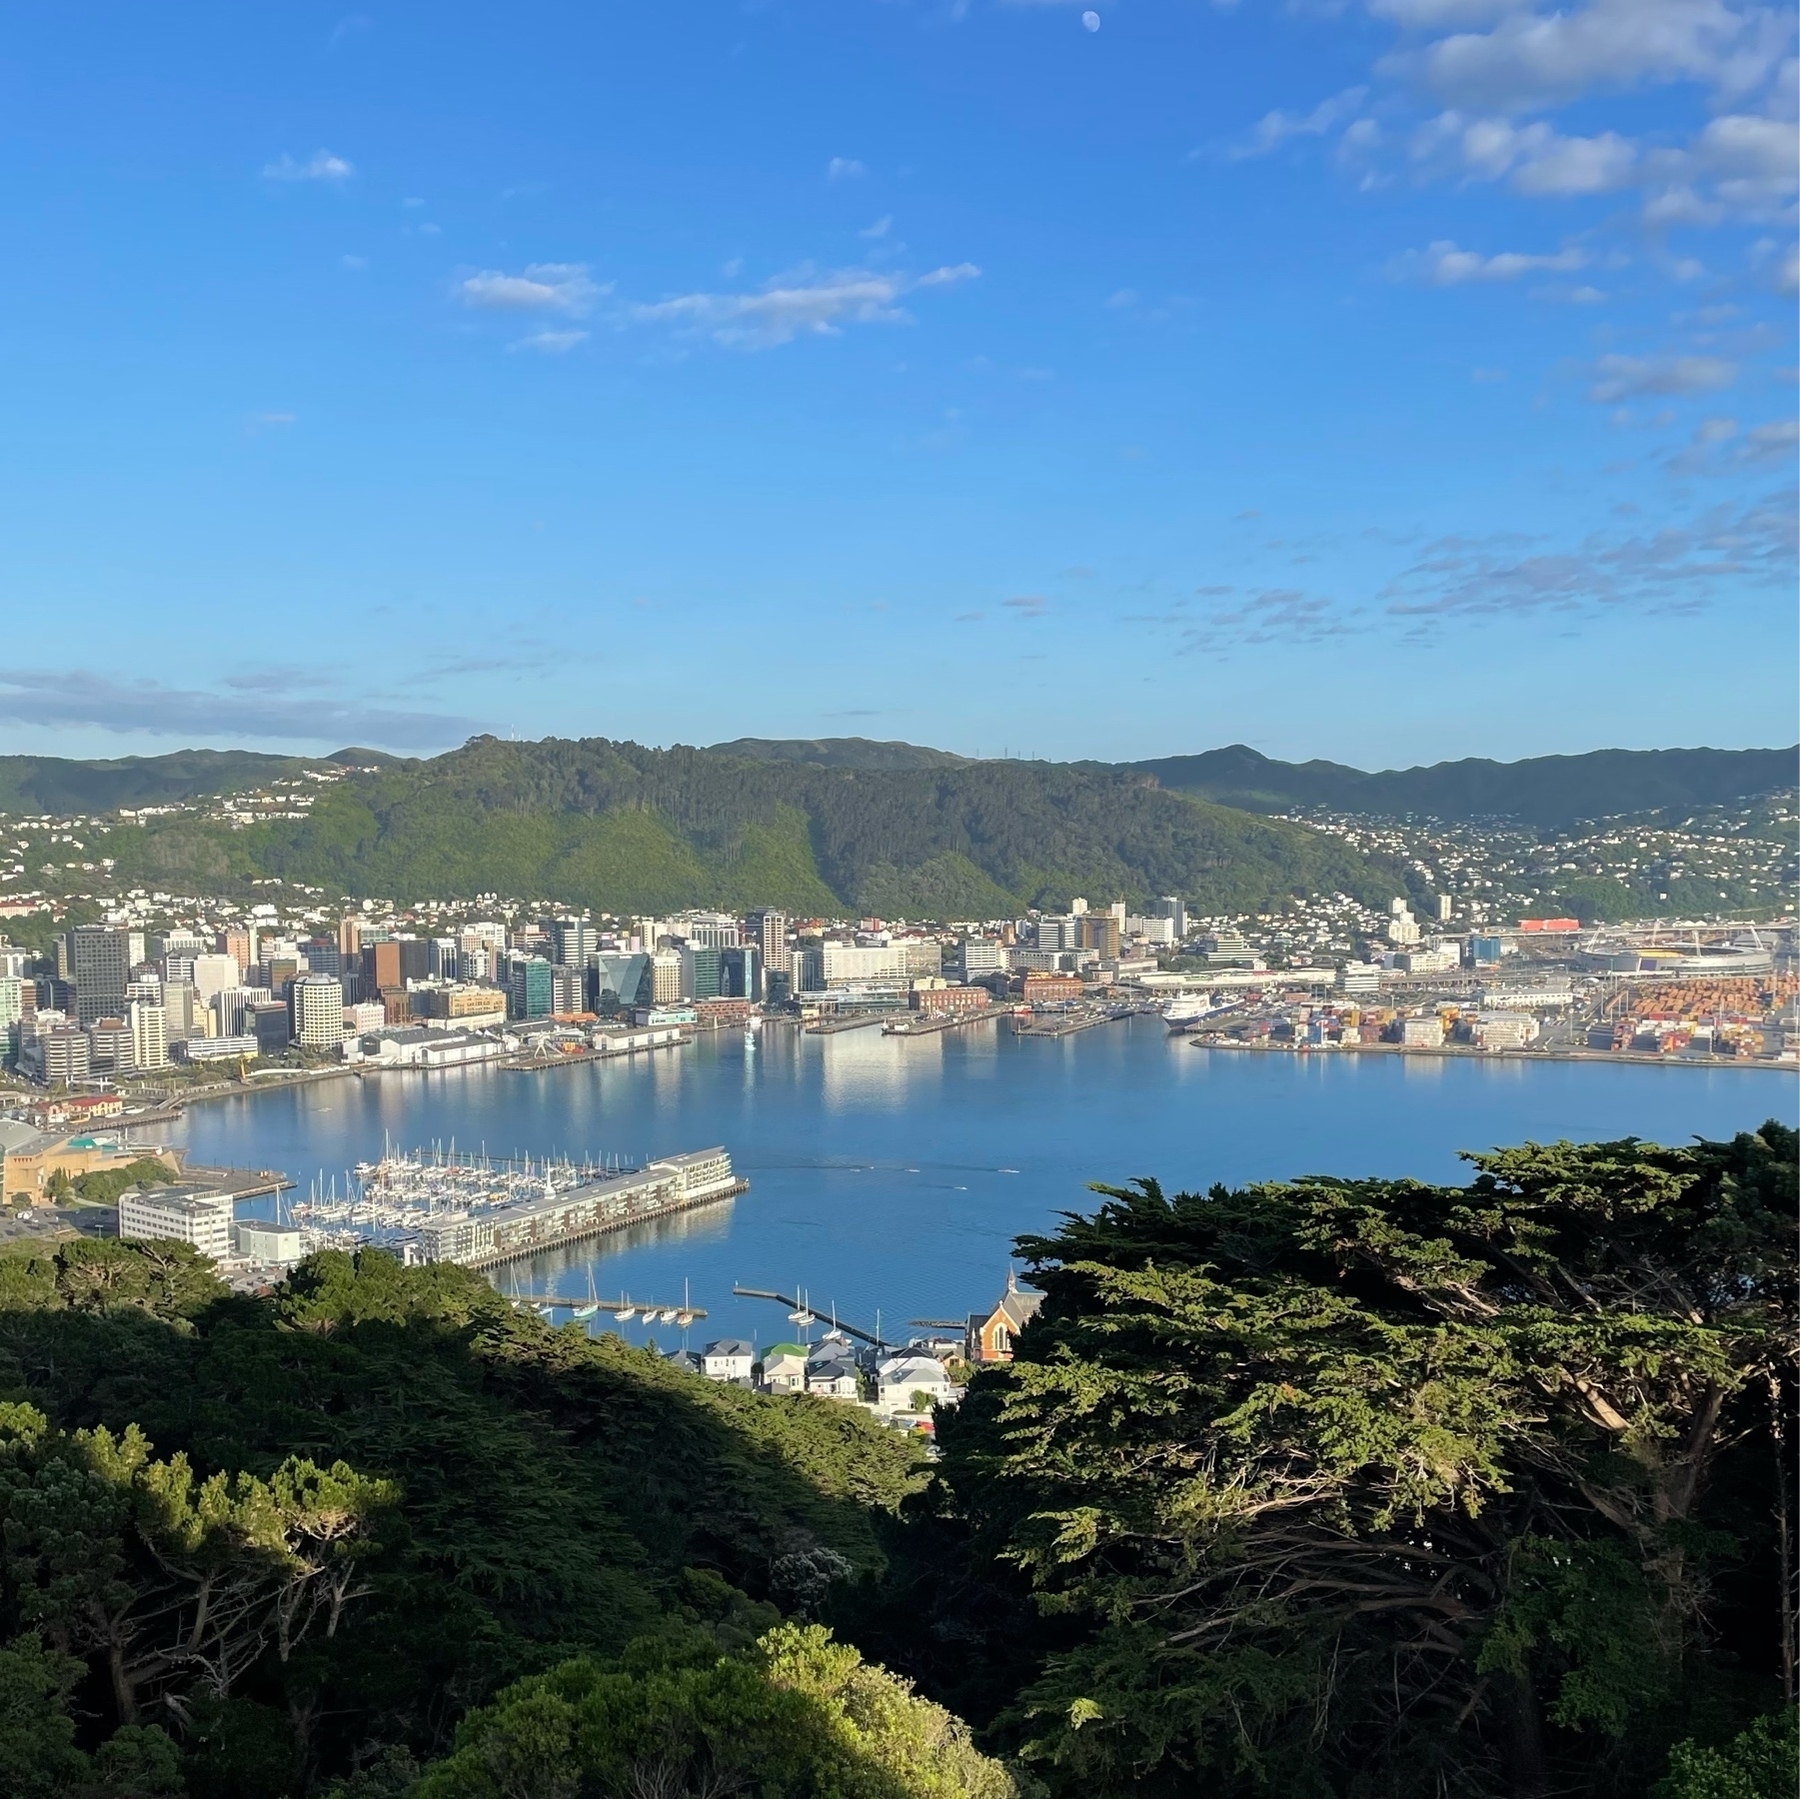 View of a city and harbour ringed by hills from a lookout. Green trees and vegetation in the foreground, blue skies with flecks of clouds beyond. 